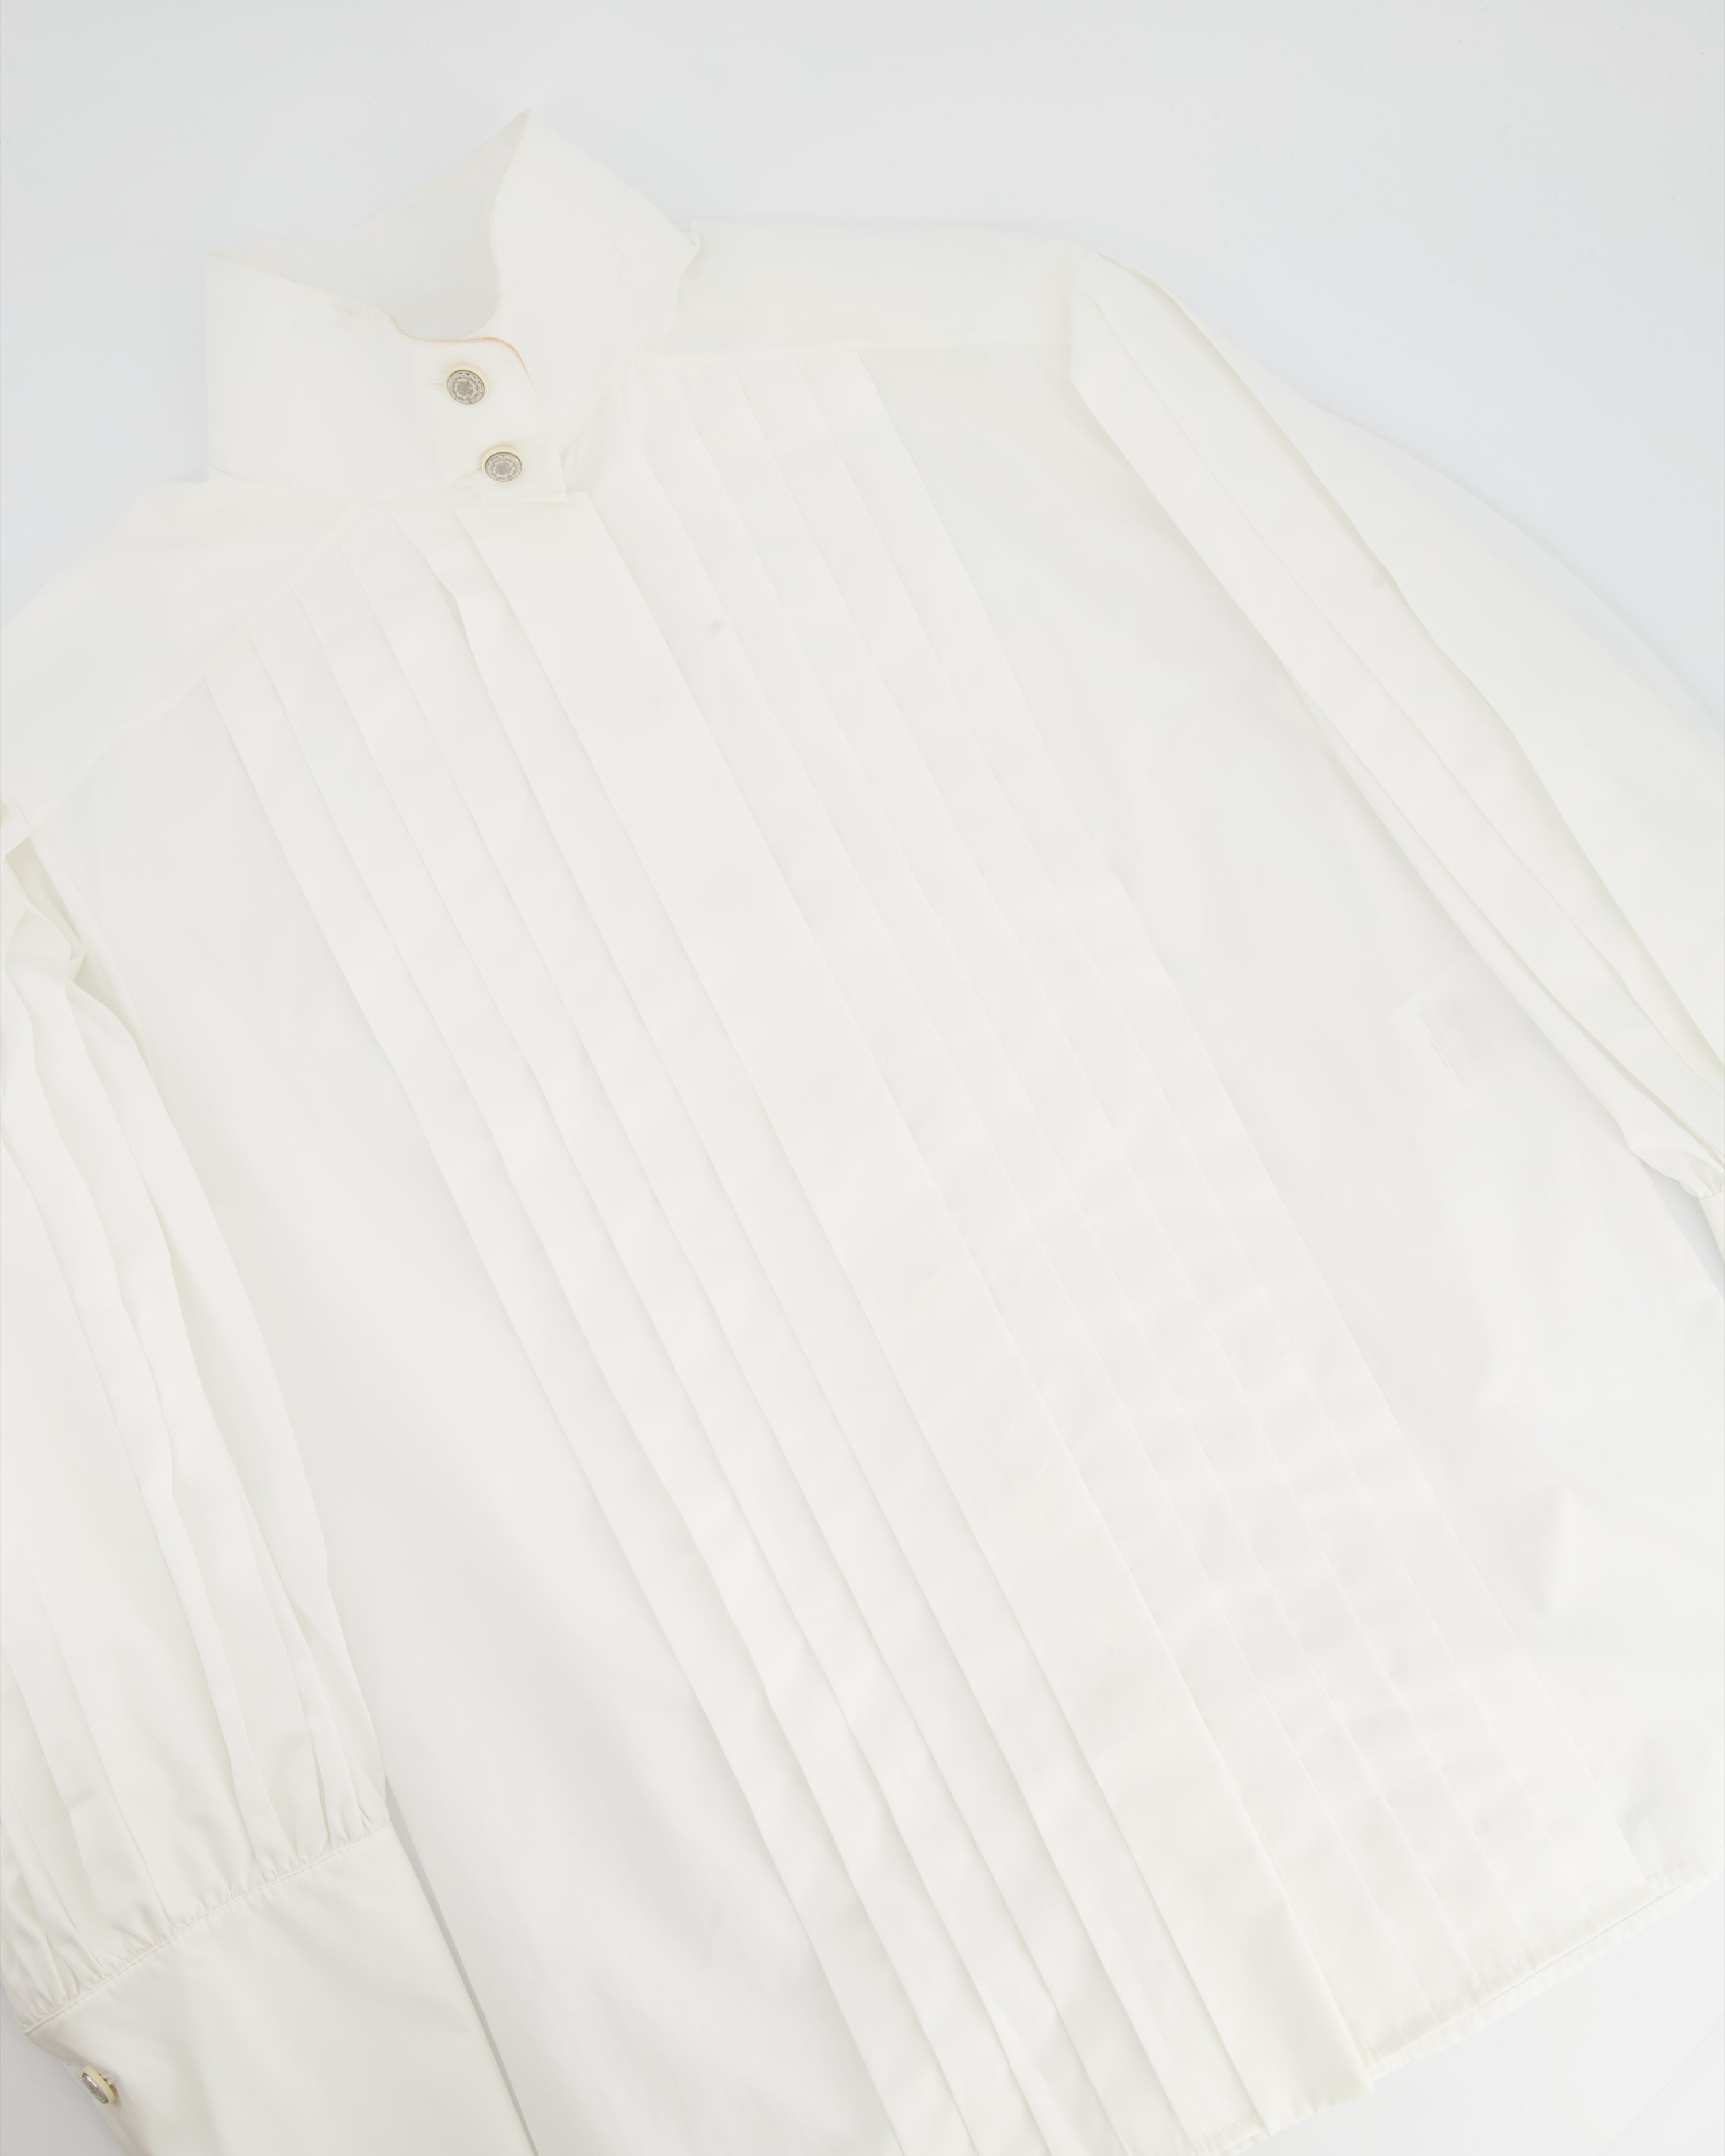 CHANEL 19S Runway CHA NEL White Shirt 38 FR New  Timeless Luxuries